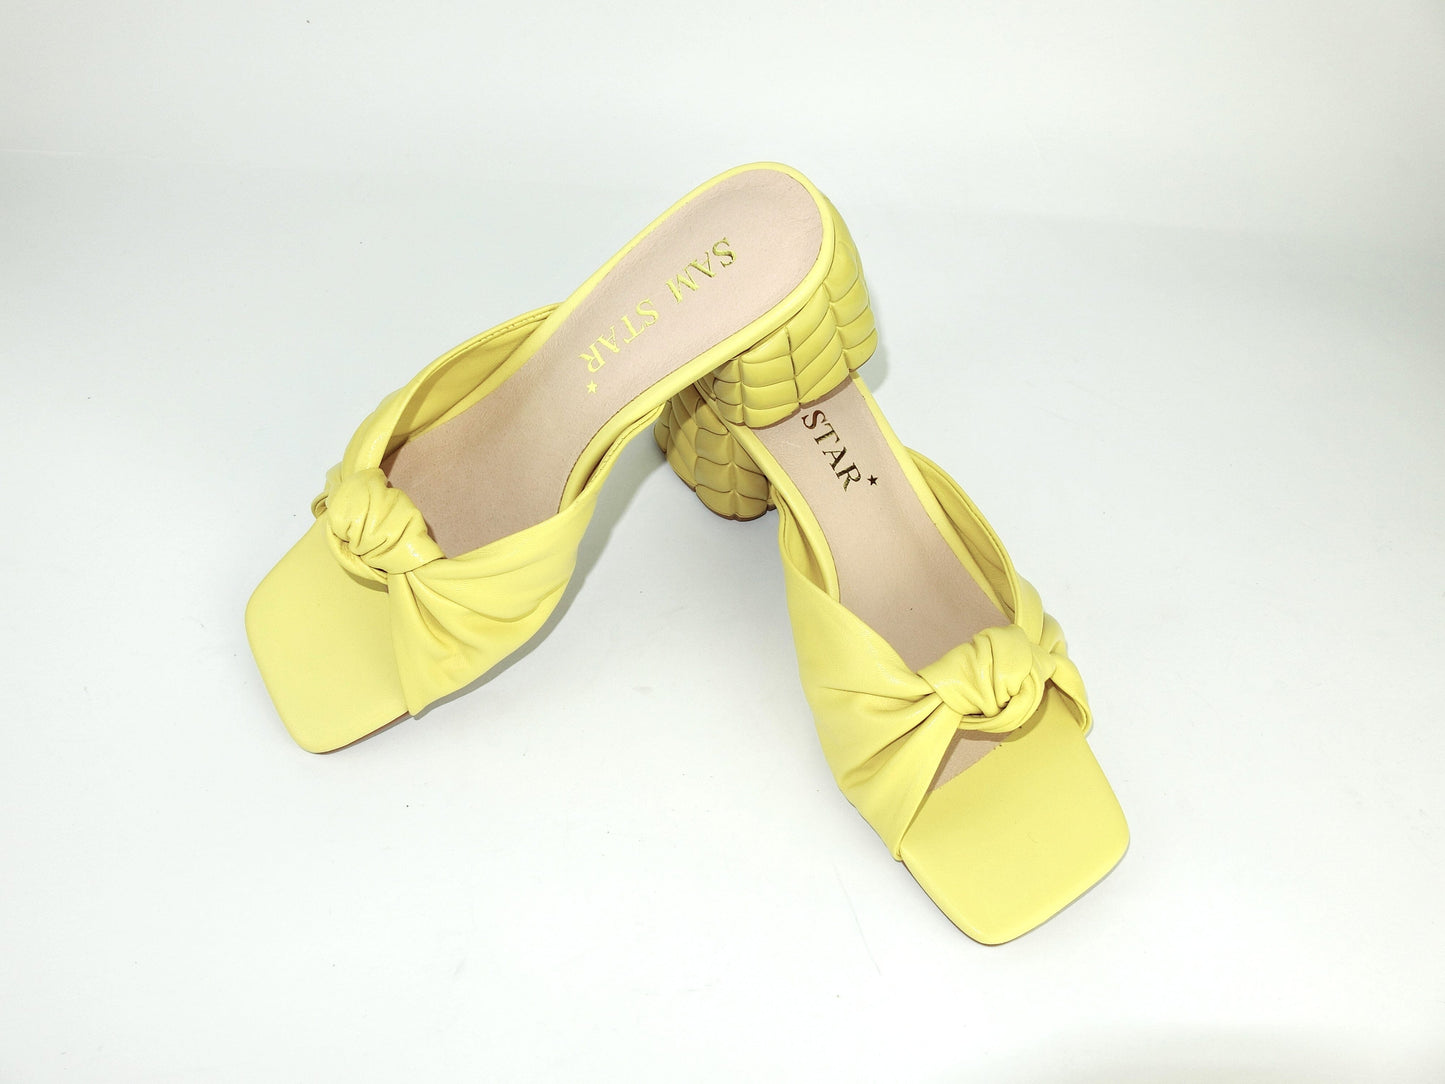 SS22014 Genuine leather bow tie block heel sandals in Yellow sandals Sam Star Shoes Yellow 38/5 